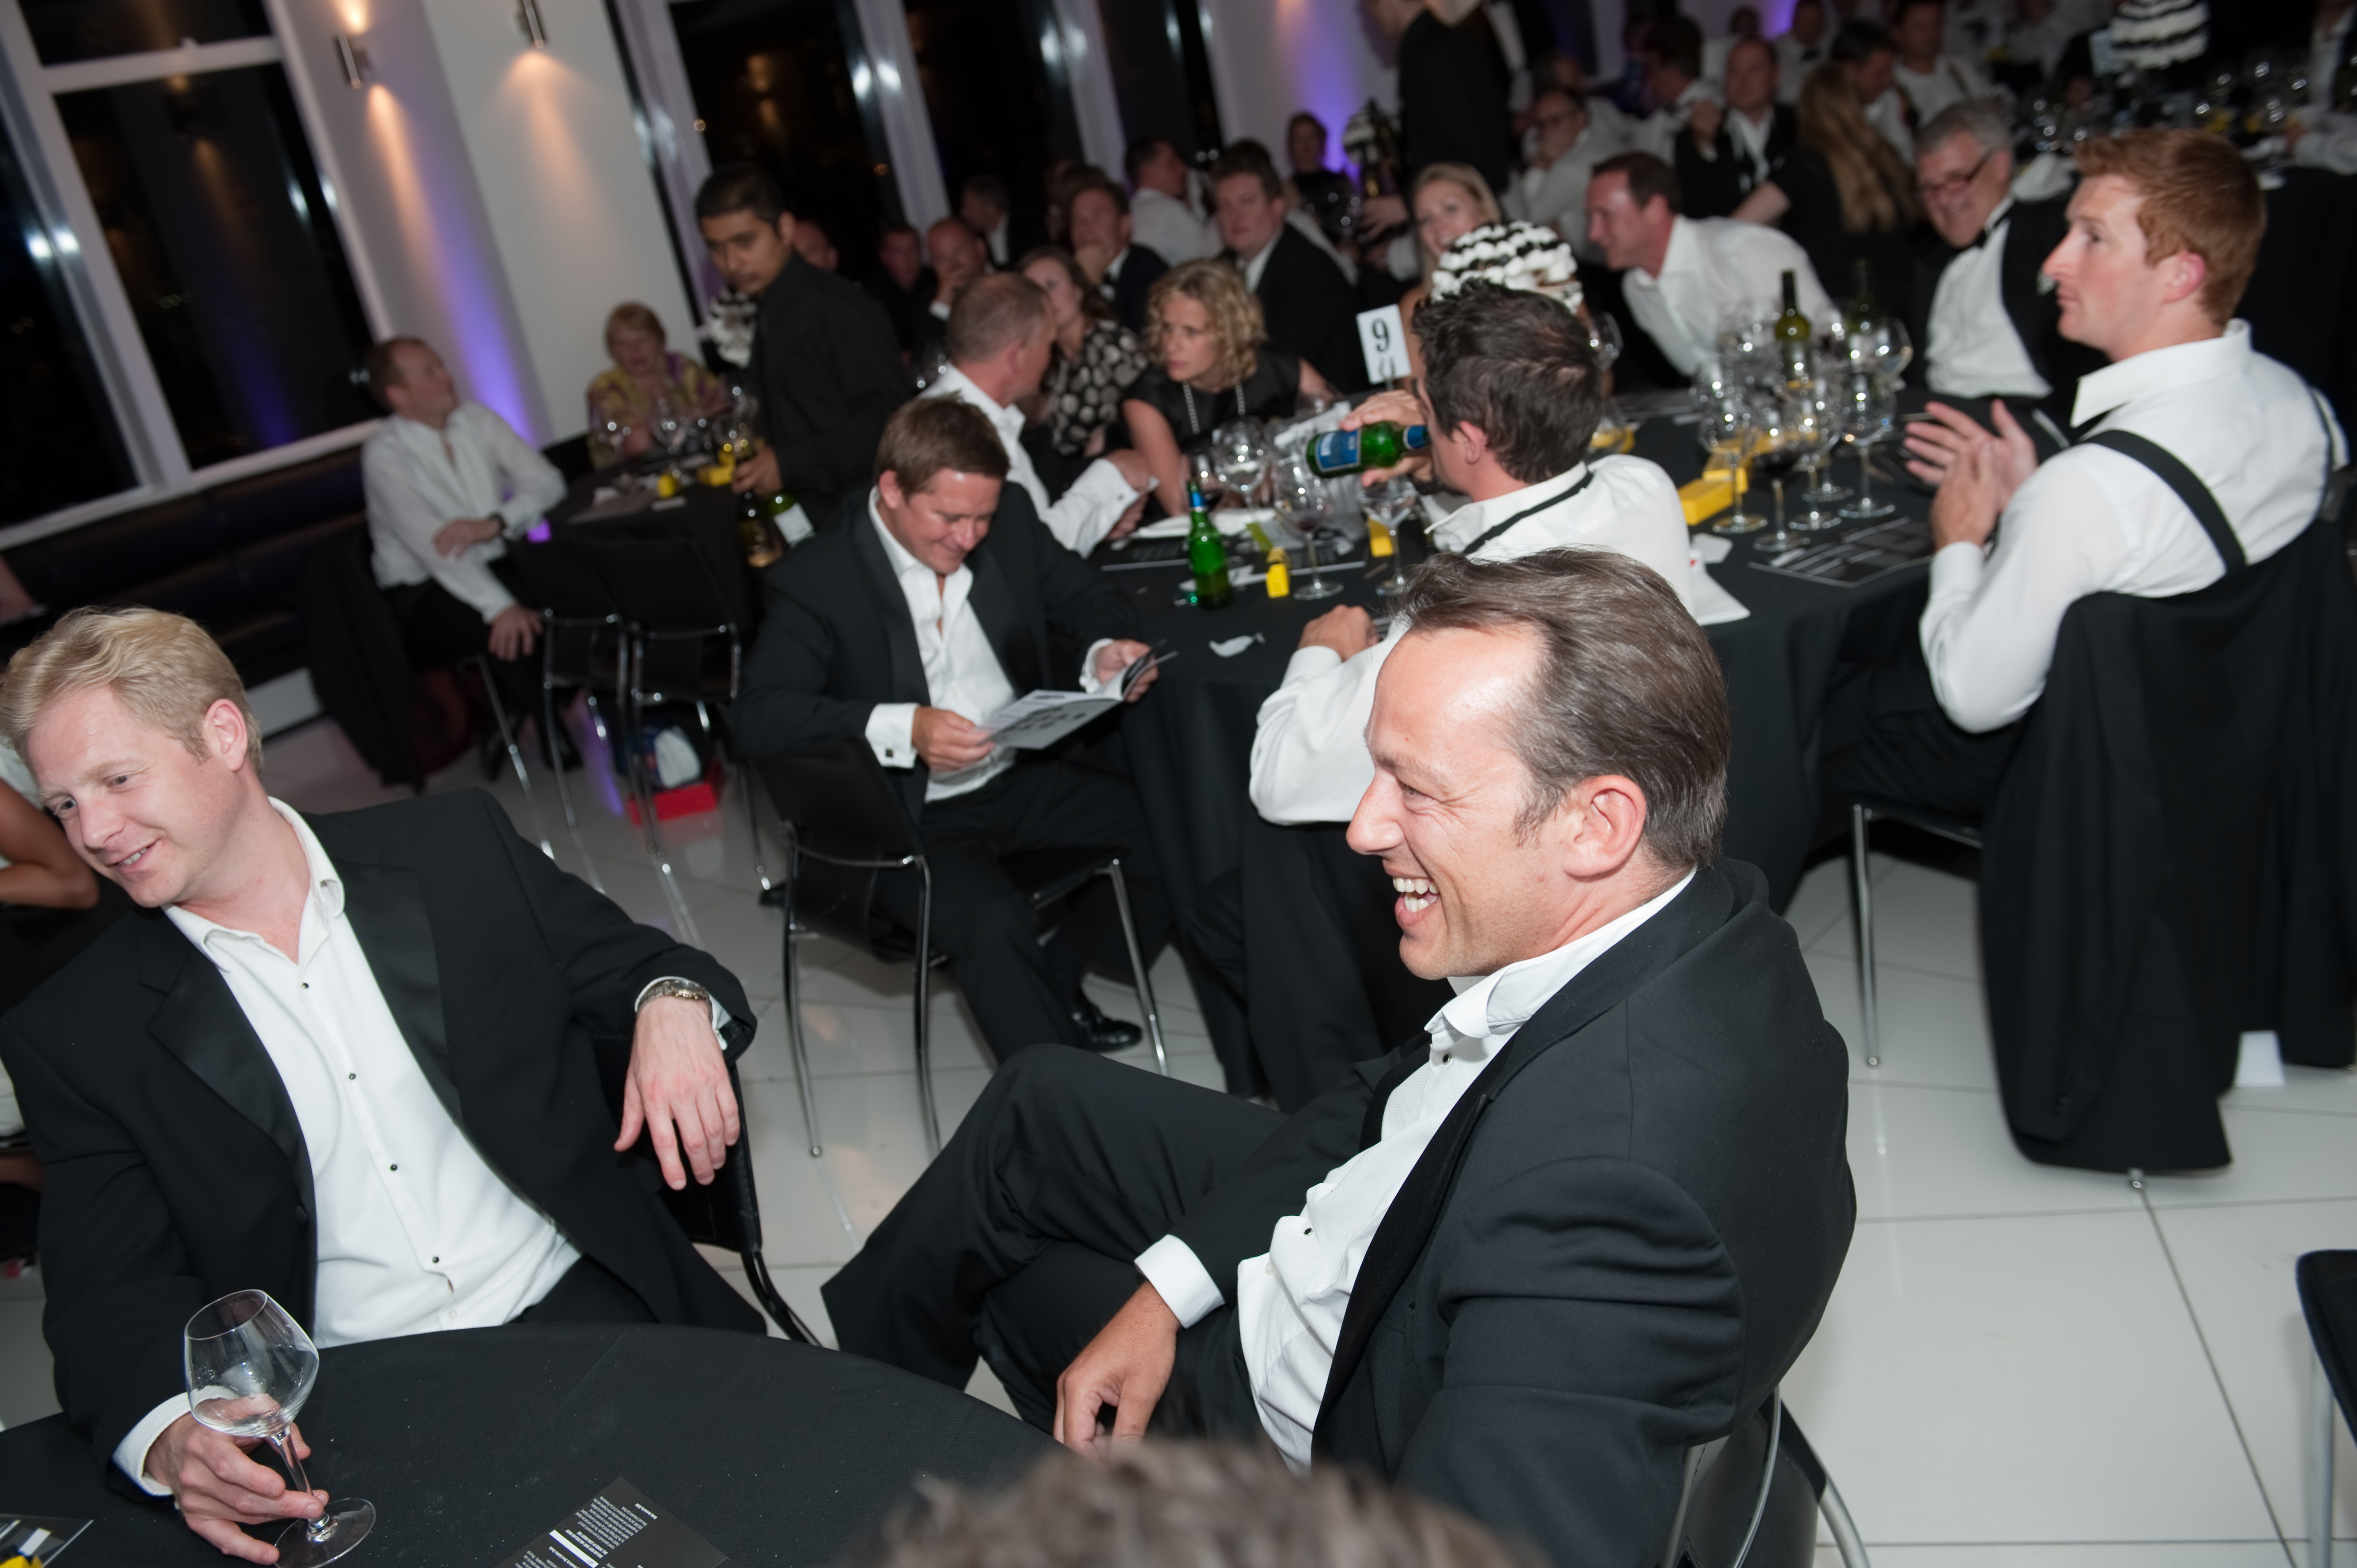 GOSH Charity Dinner Event | People Laughing